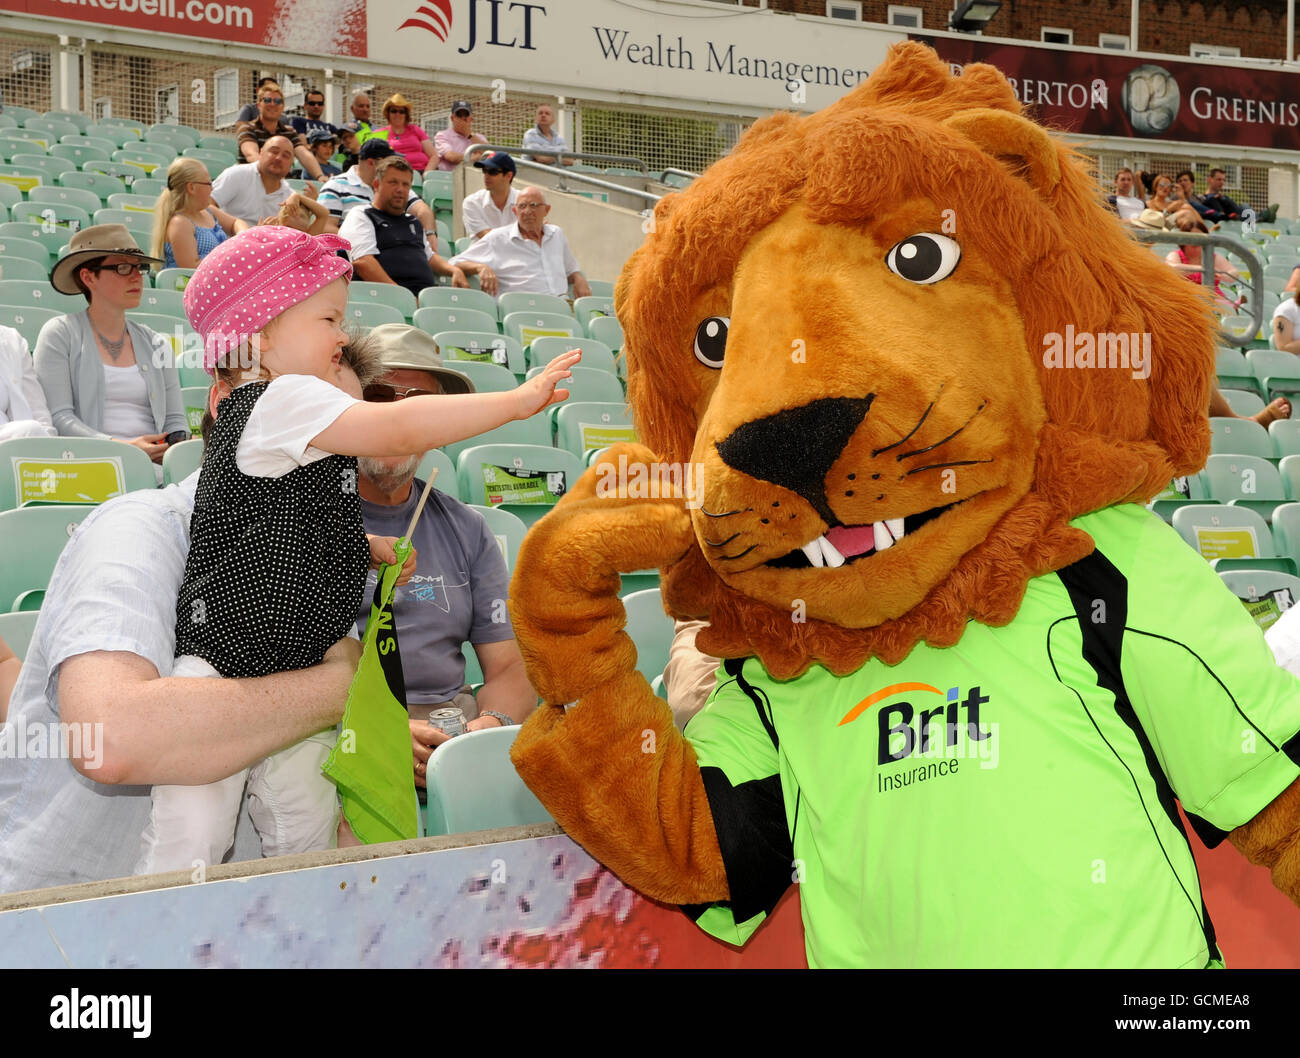 Cricket - Clydesdale Bank 40 - Group A - Surrey v Somerset - The Brit Insurance Oval Stock Photo